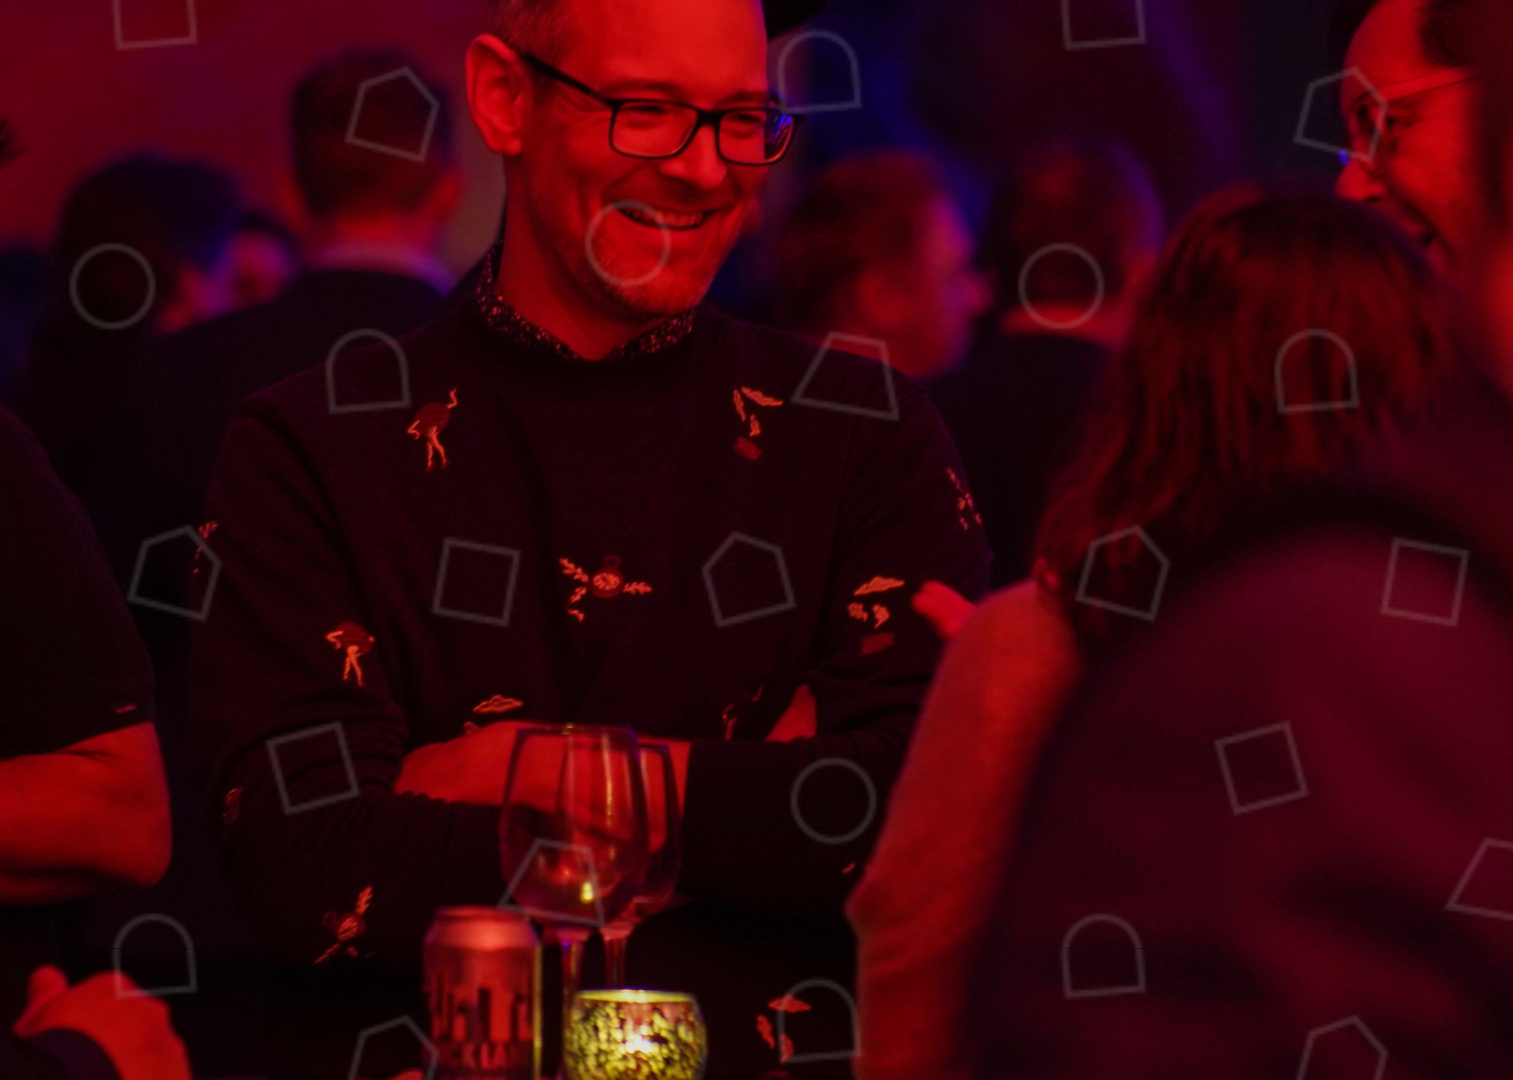 An image of a a man smiling in a group of people in a party setting